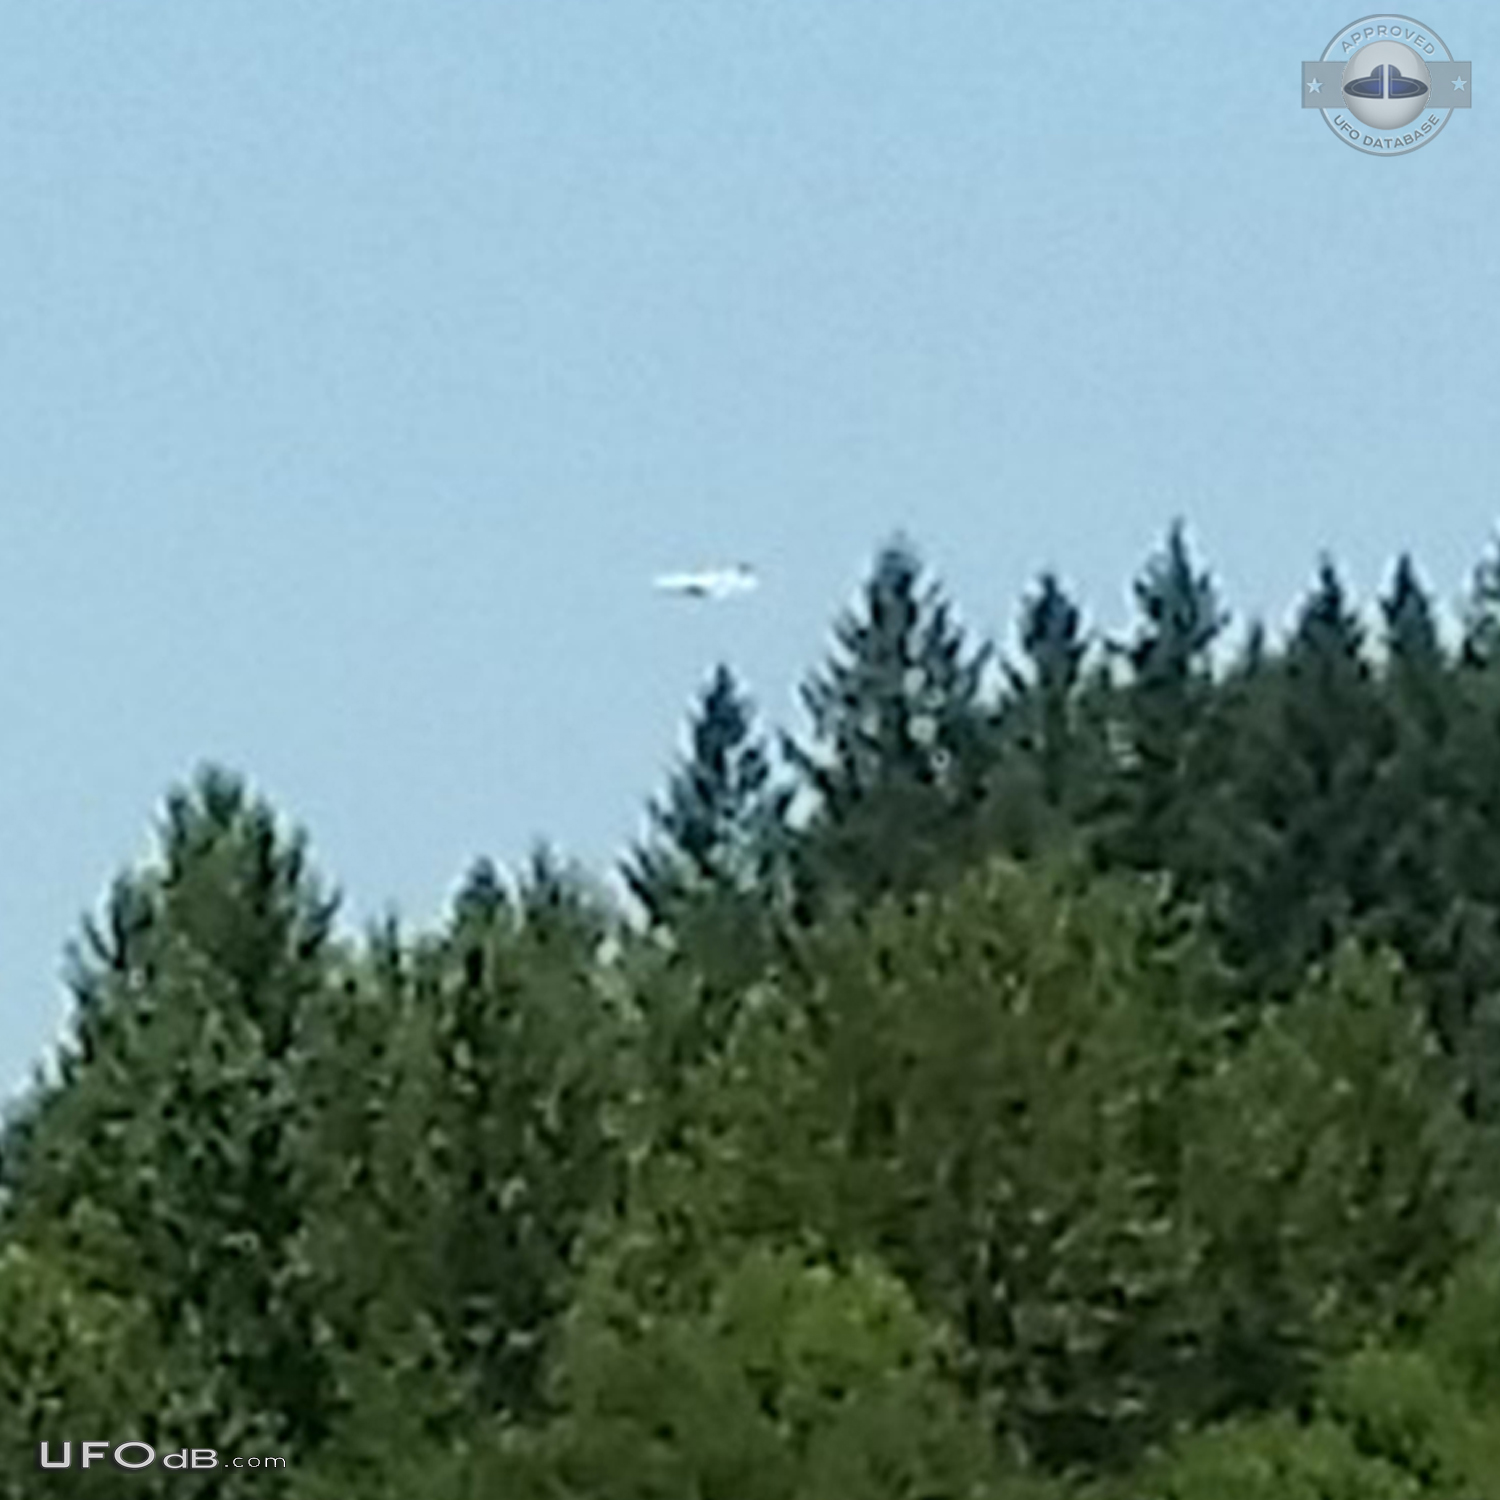 I was driving home from work and saw an object hovering over the trees UFO Picture #710-6